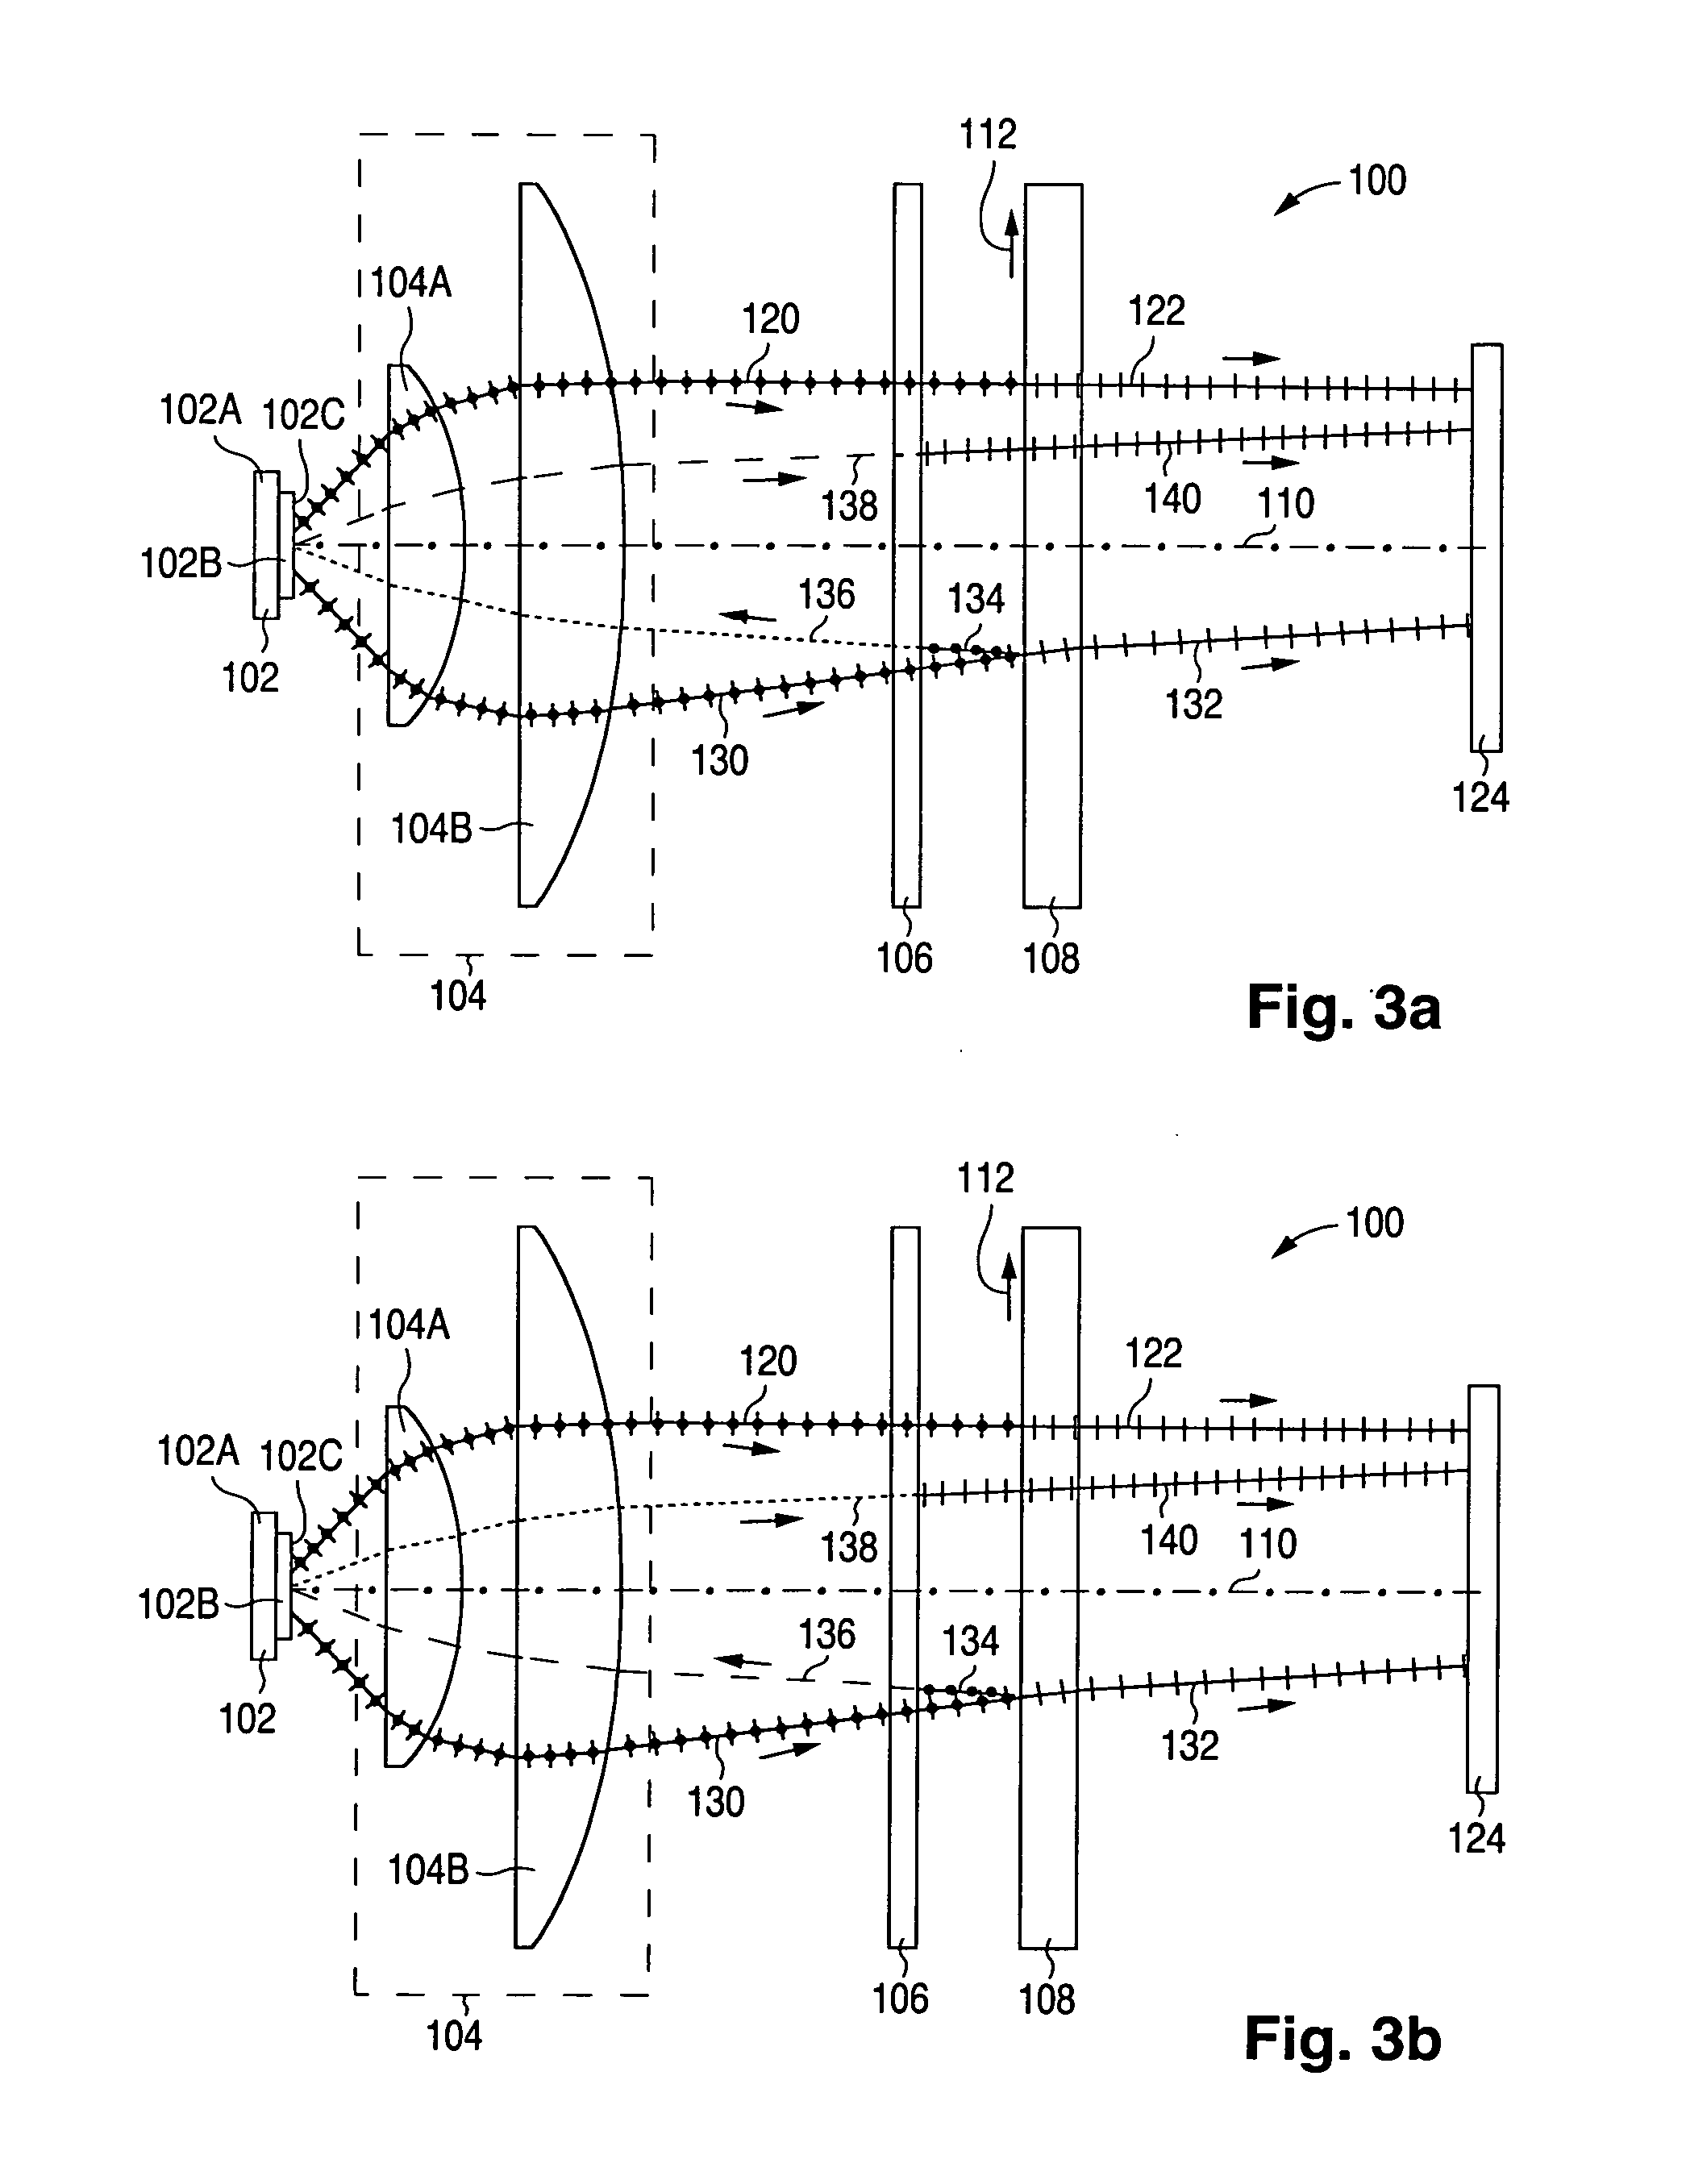 Illumination system and method with efficient polarization recovery